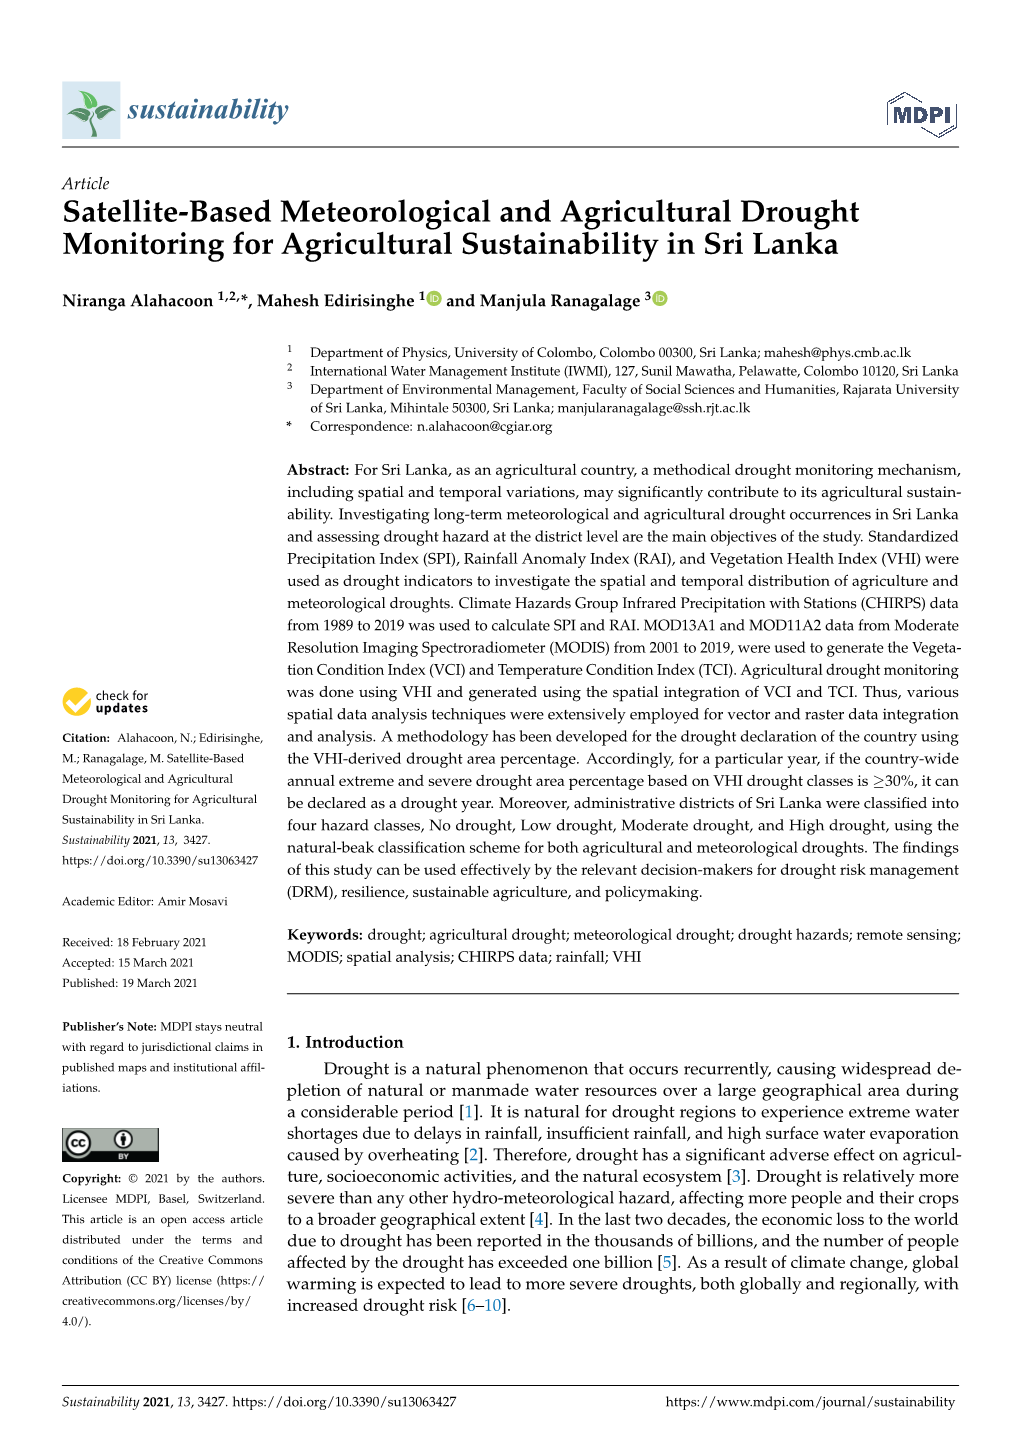 Satellite-Based Meteorological and Agricultural Drought Monitoring for Agricultural Sustainability in Sri Lanka